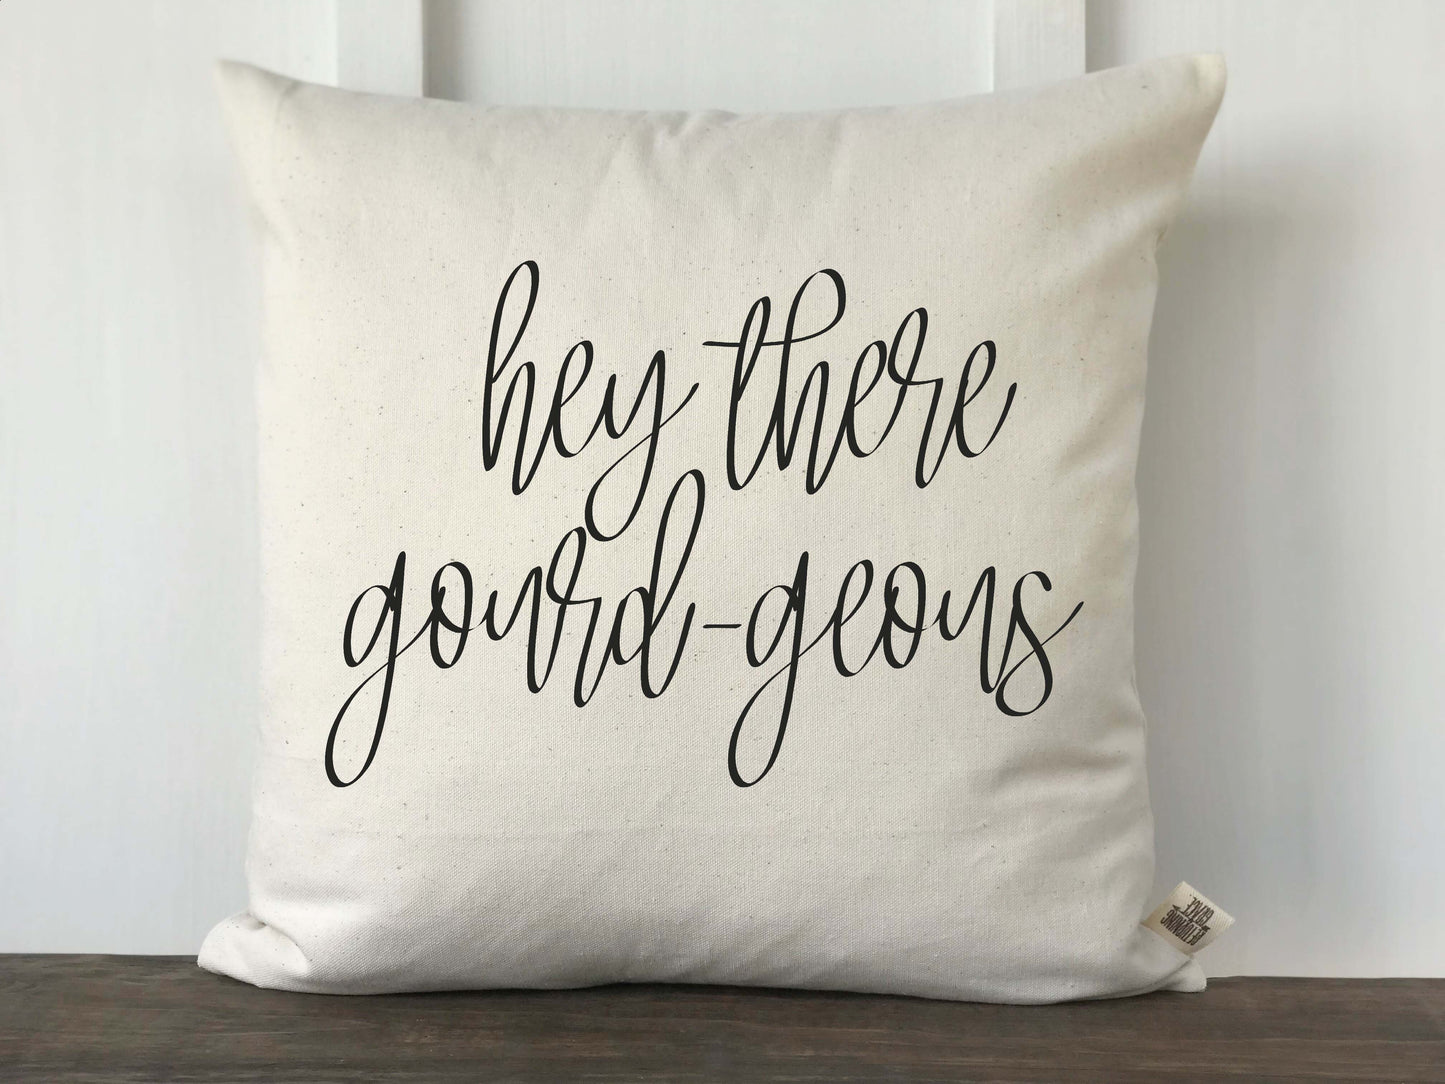 Hey There Gourd-geous Script Pillow Cover